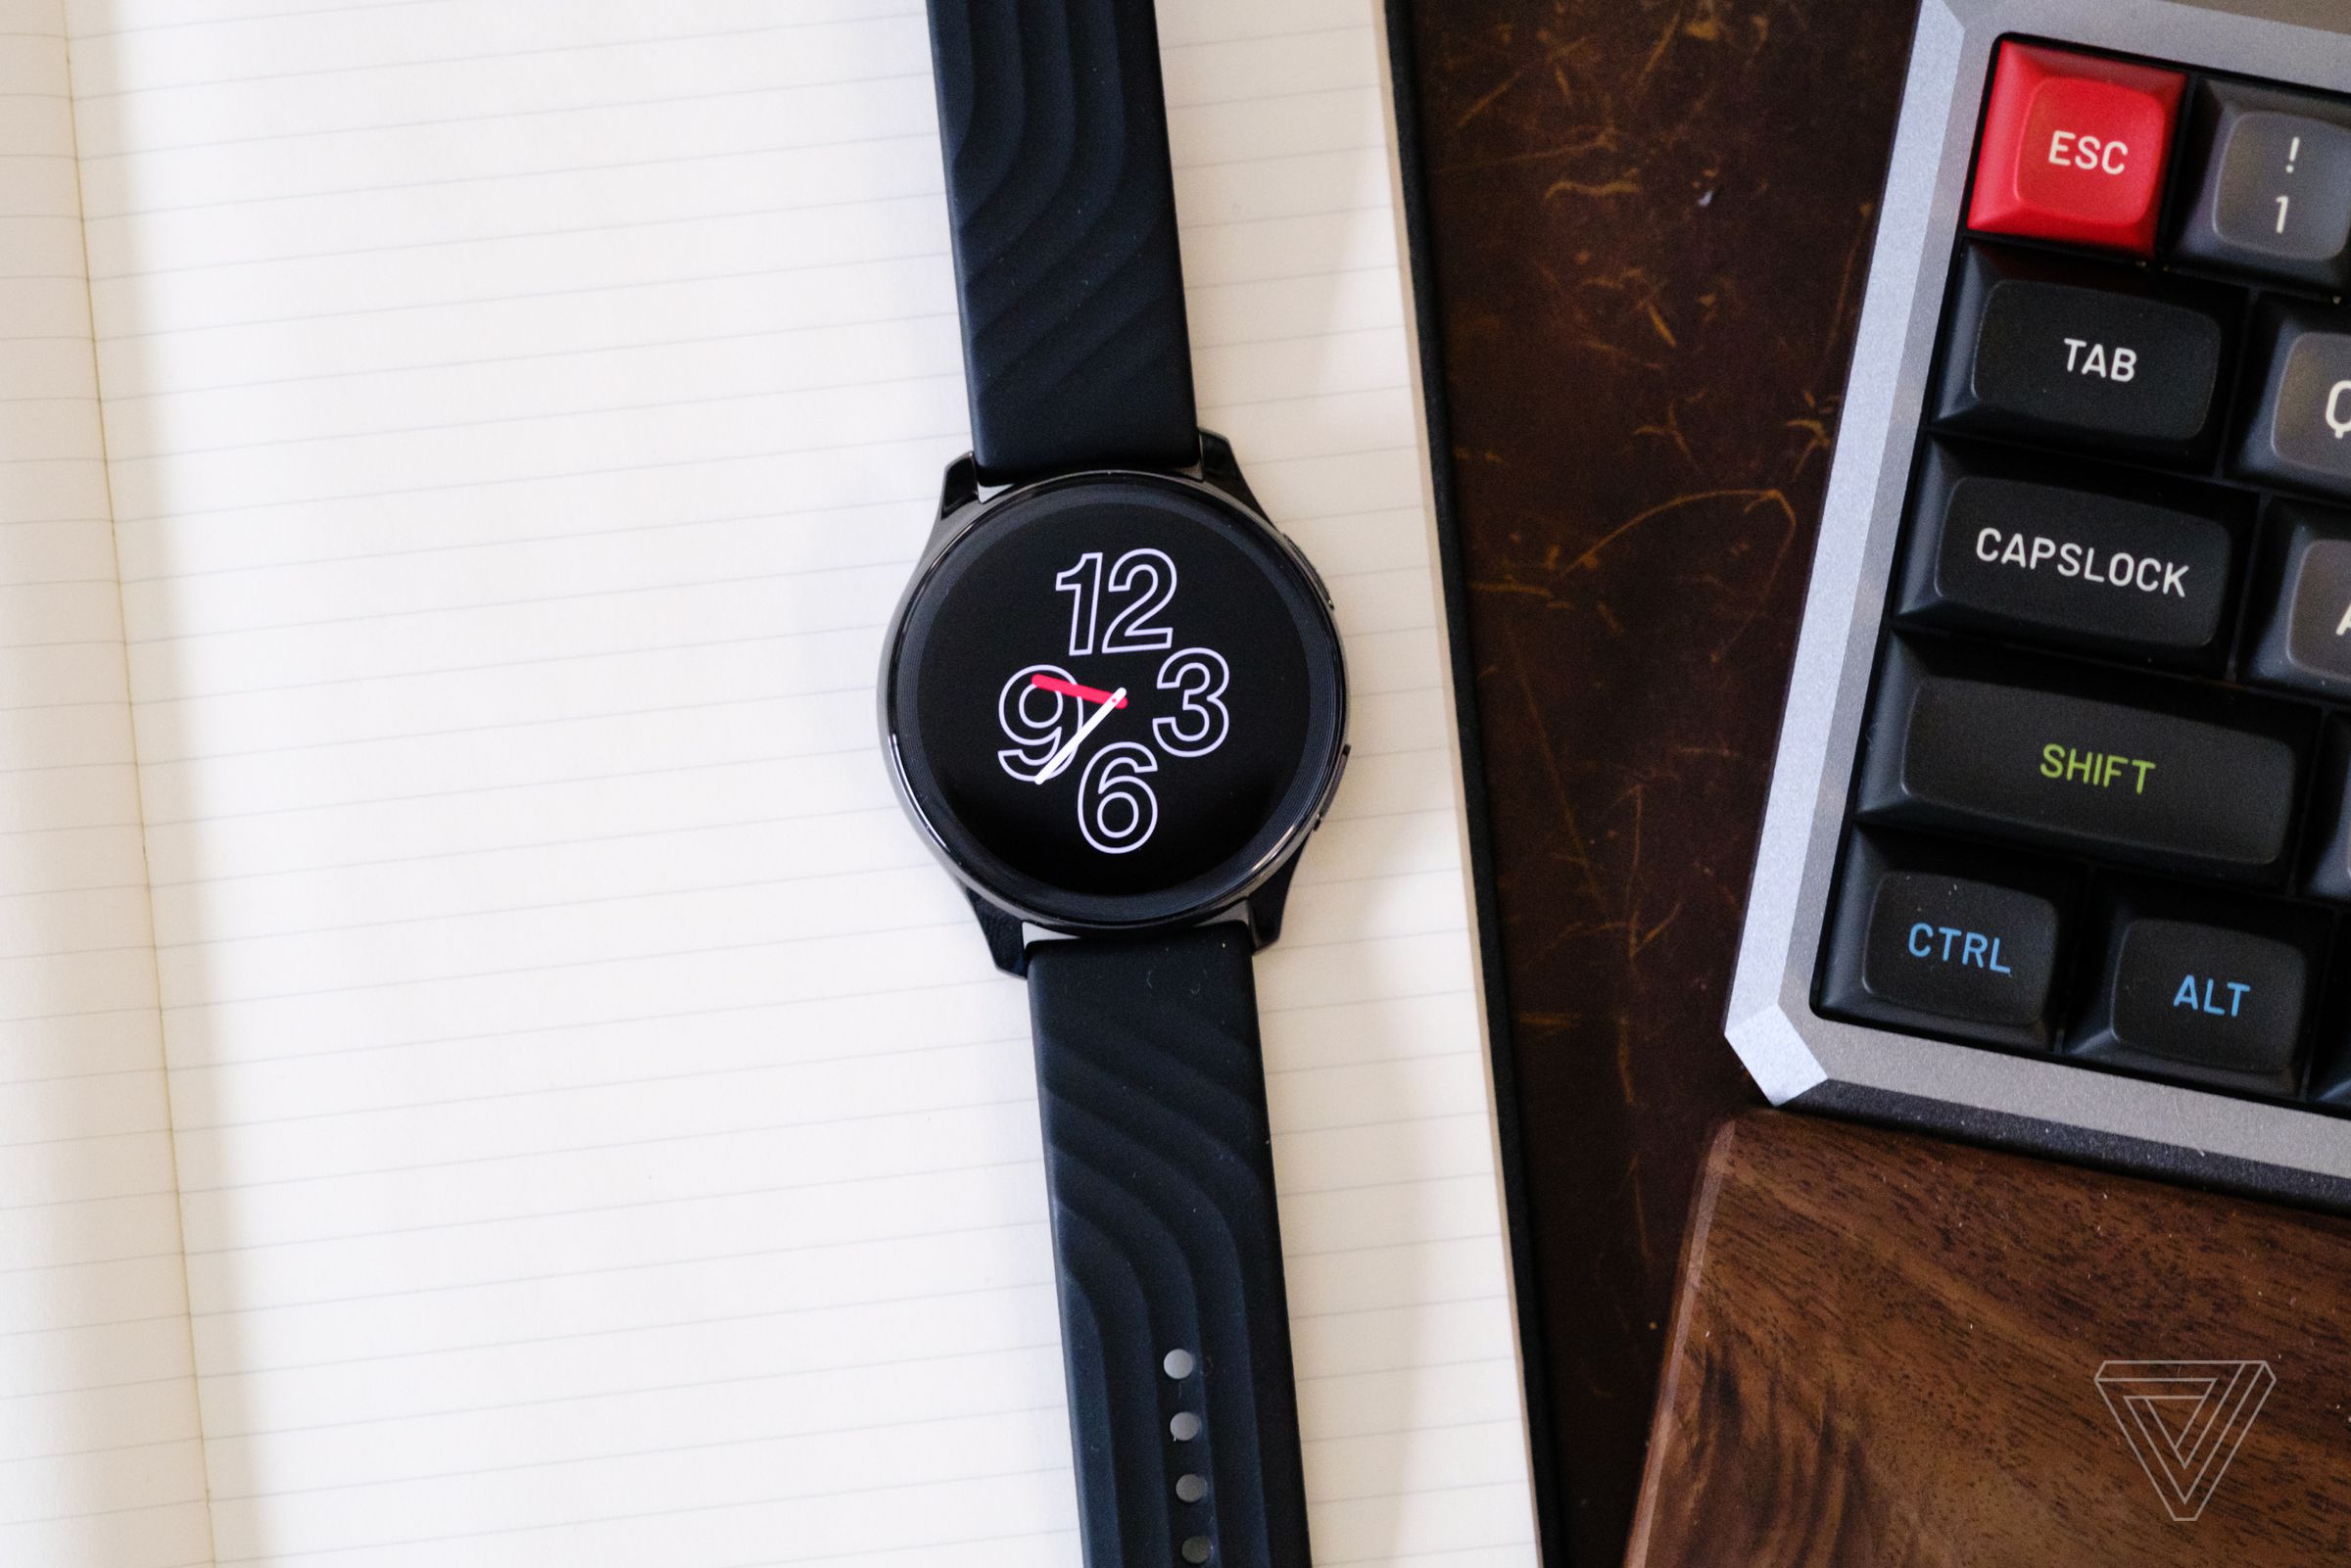 The OnePlus Watch looks like many other smartwatches, but most especially the Samsung Galaxy Watch Active.